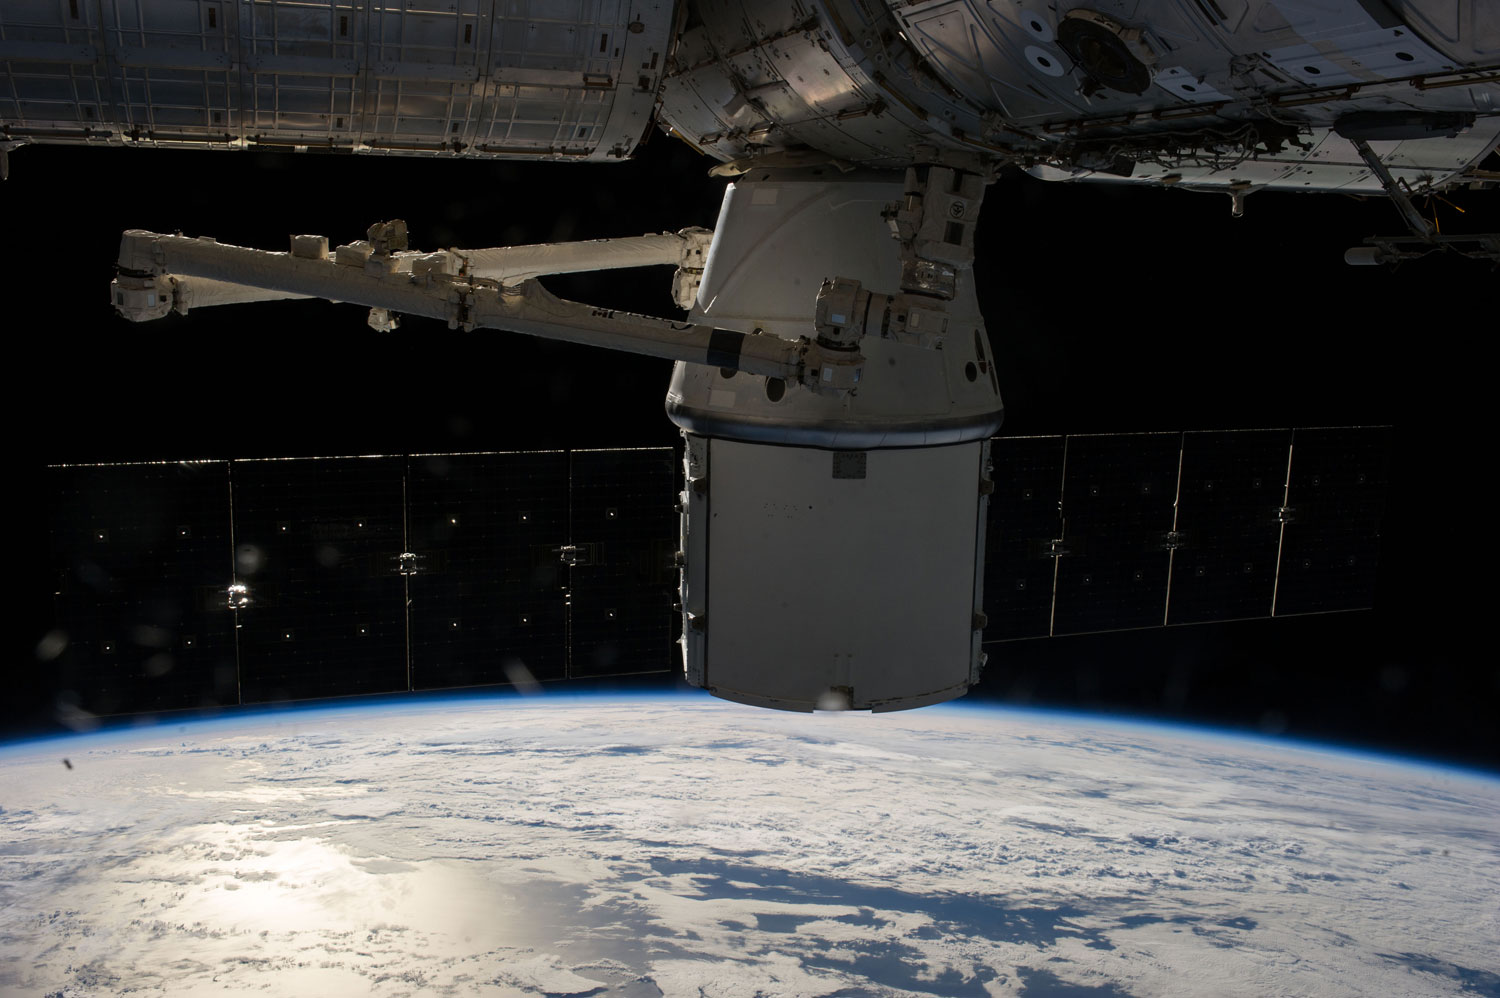 The SpaceX Dragon capsule is berthed at the International Space Station on April 20, 2014 as photographed by the Expedition 39 crew members onboard the orbital outpost.